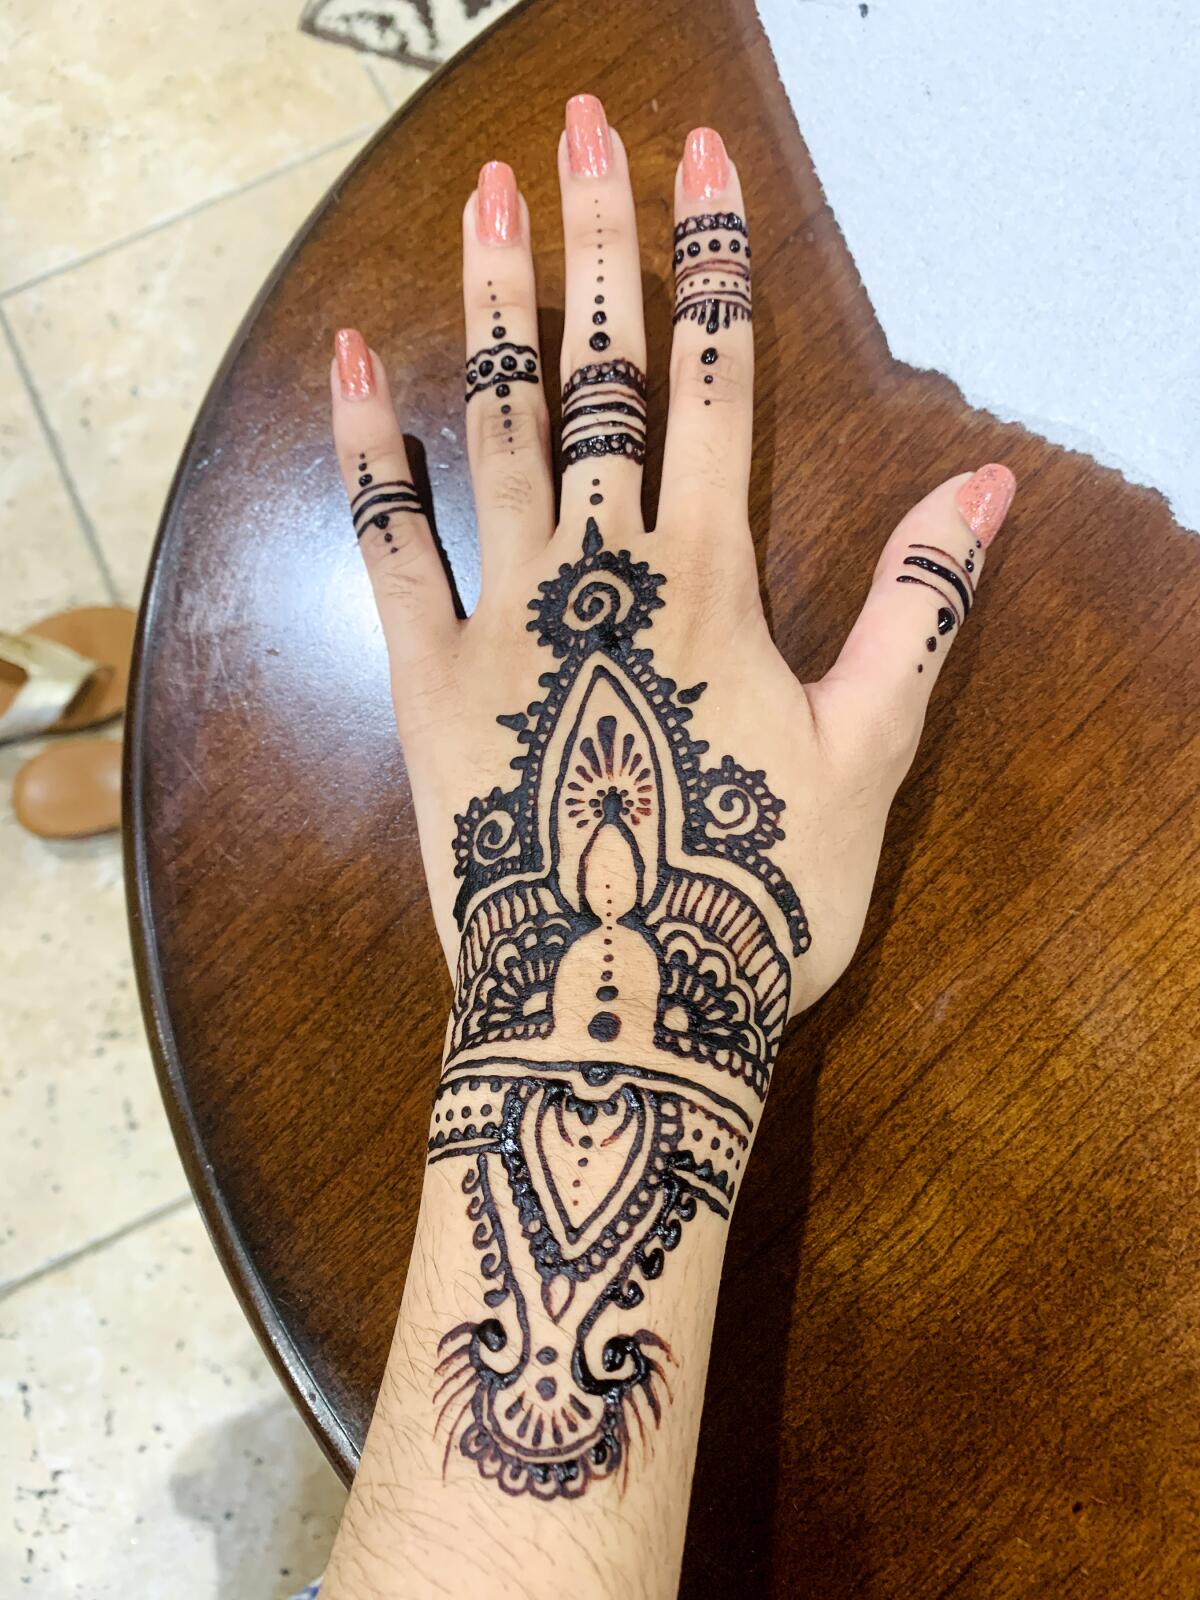 Applying henna with family was one of the first social activities that Sidra Ali was able to engage at home 